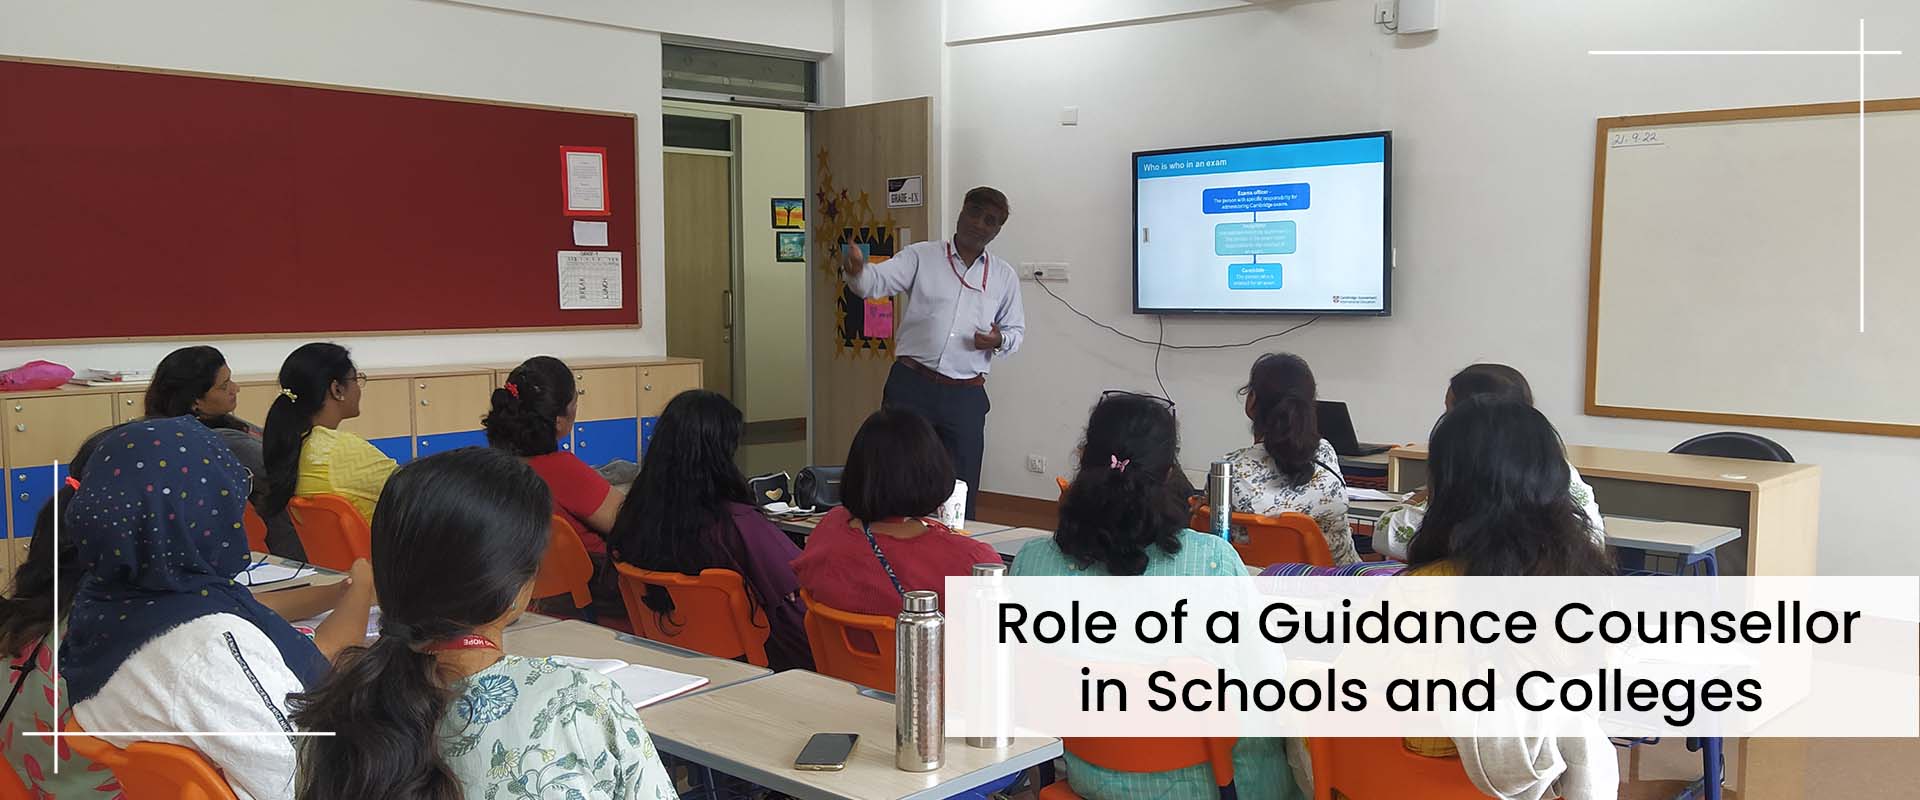 Role of a Guidance Counsellor in Schools and Colleges